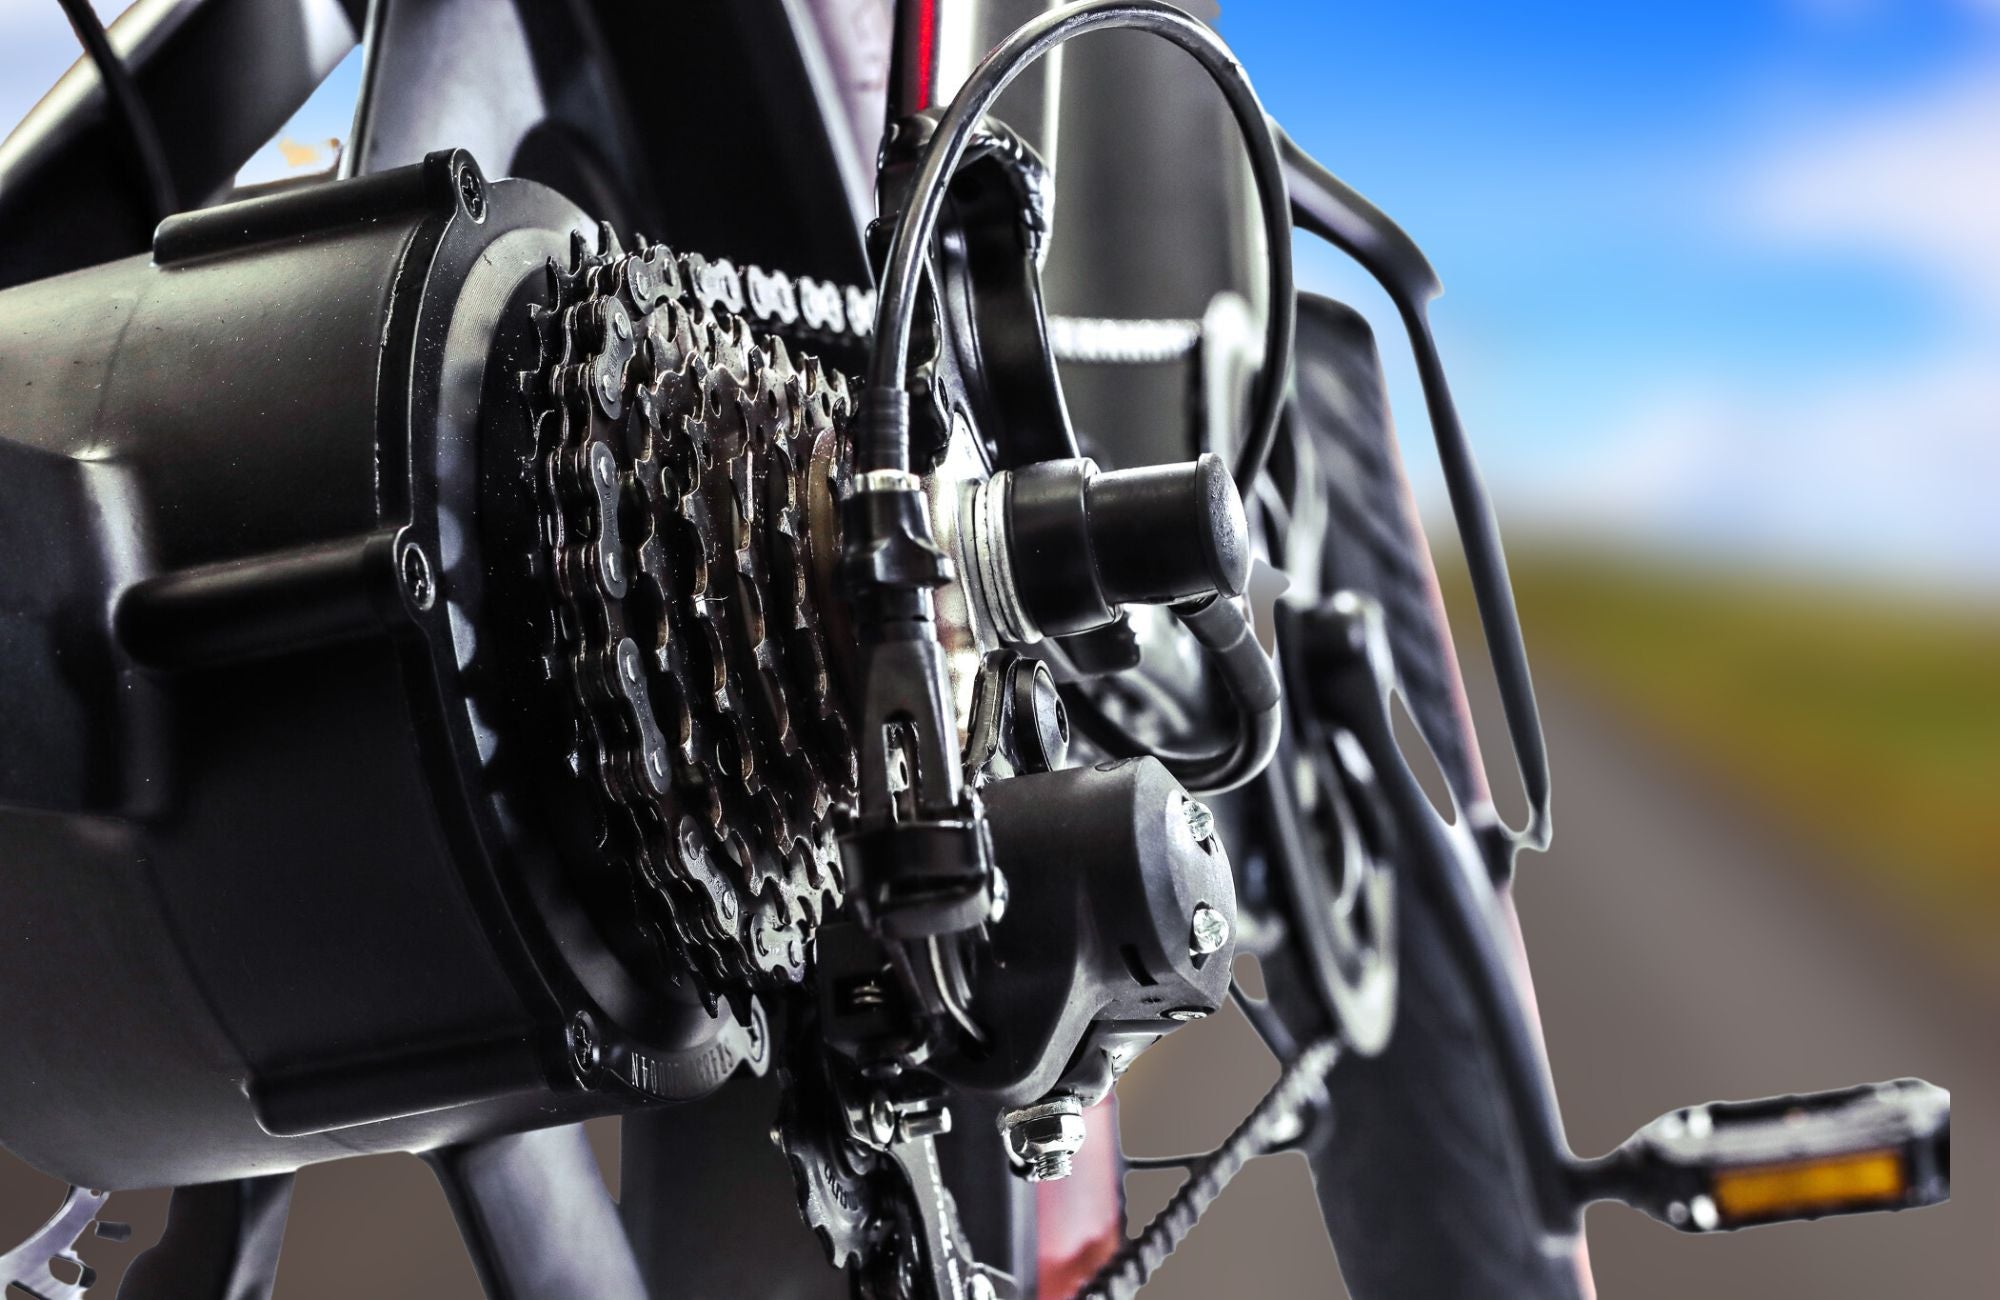 Up close shot of gear system and derailleur on ebike